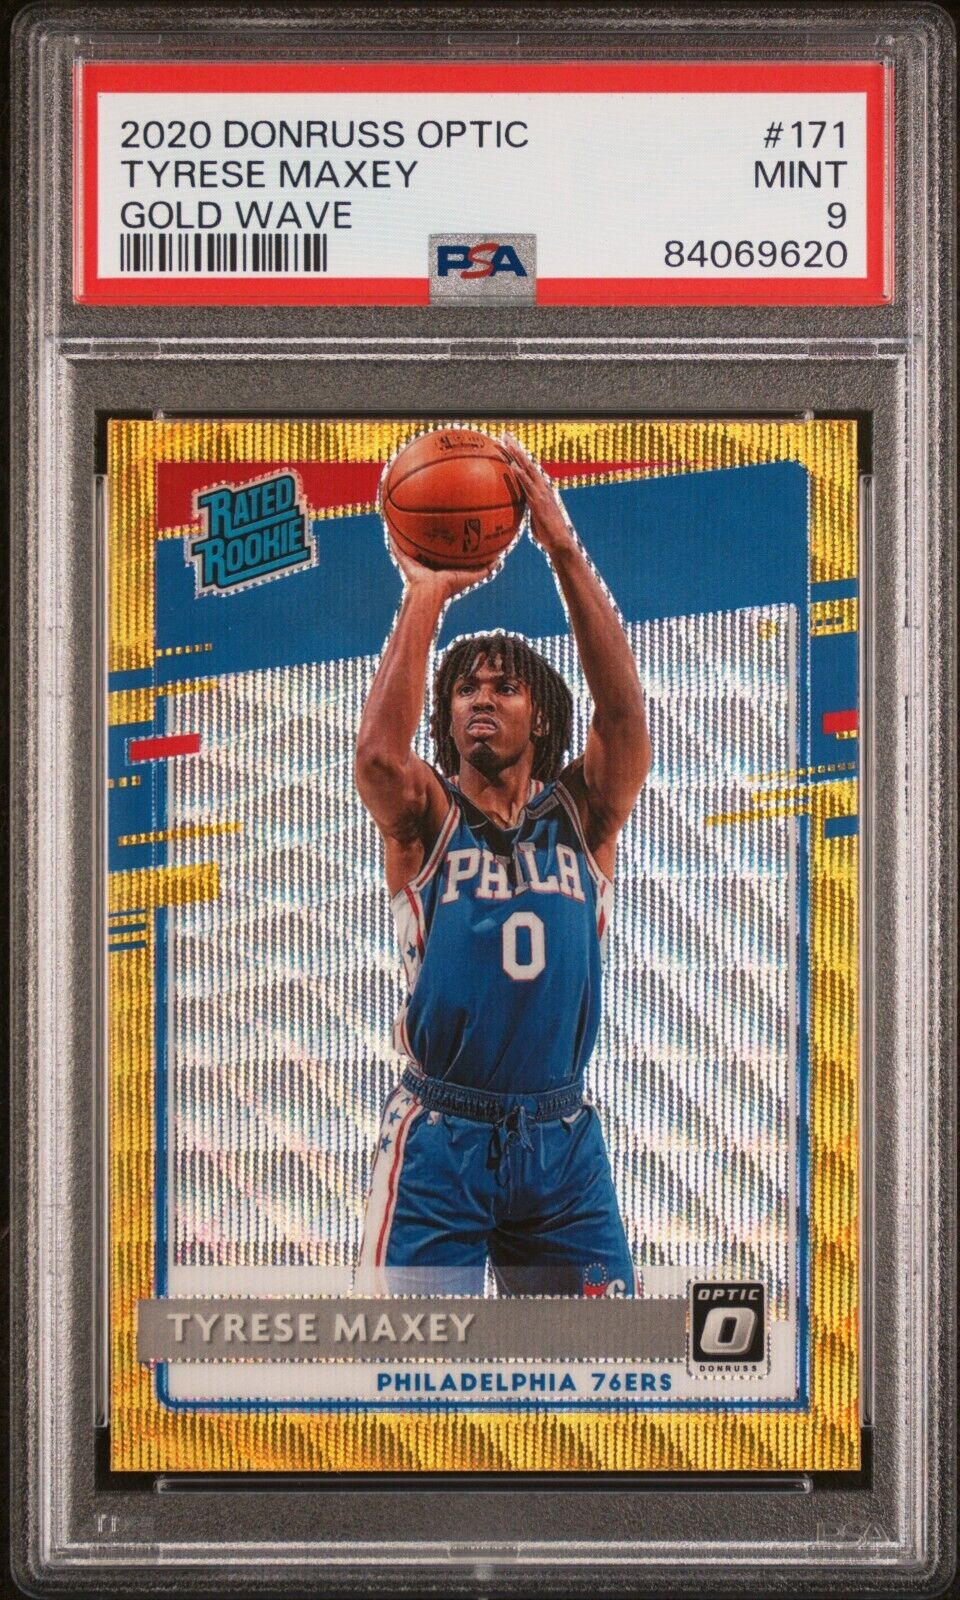 2020 Donruss Optic Tyrese Maxey #171 Rated Rookie RC Gold Wave PSA 9 Mint